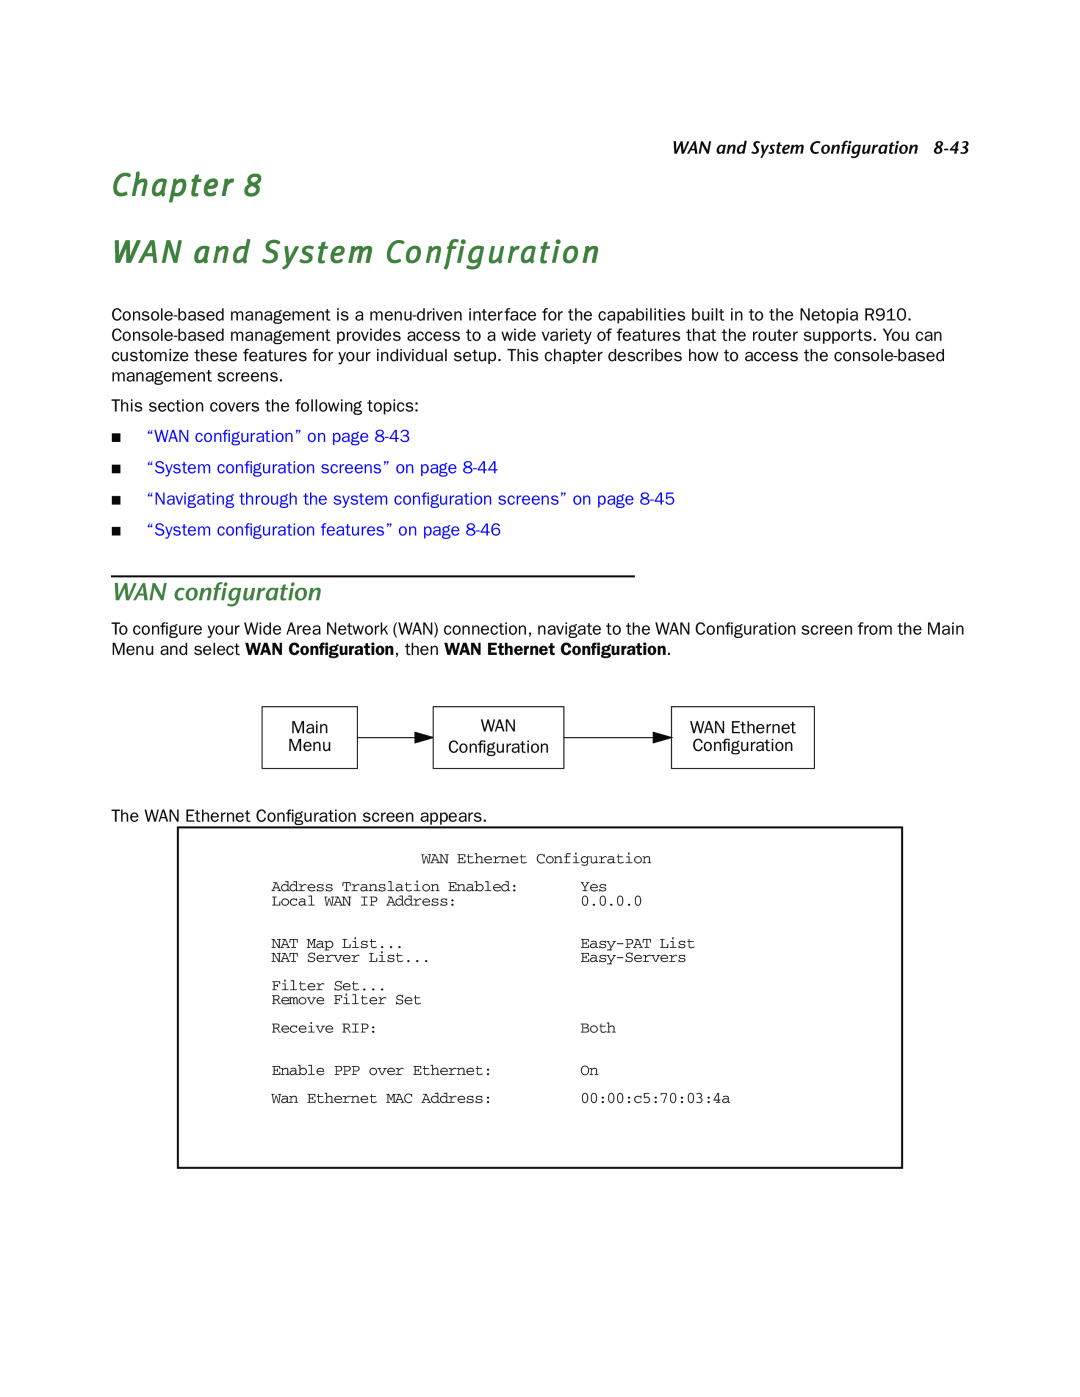 Netopia R910 manual Chapter WAN and System Configuration, WAN conﬁguration, WAN and System Conﬁguration 